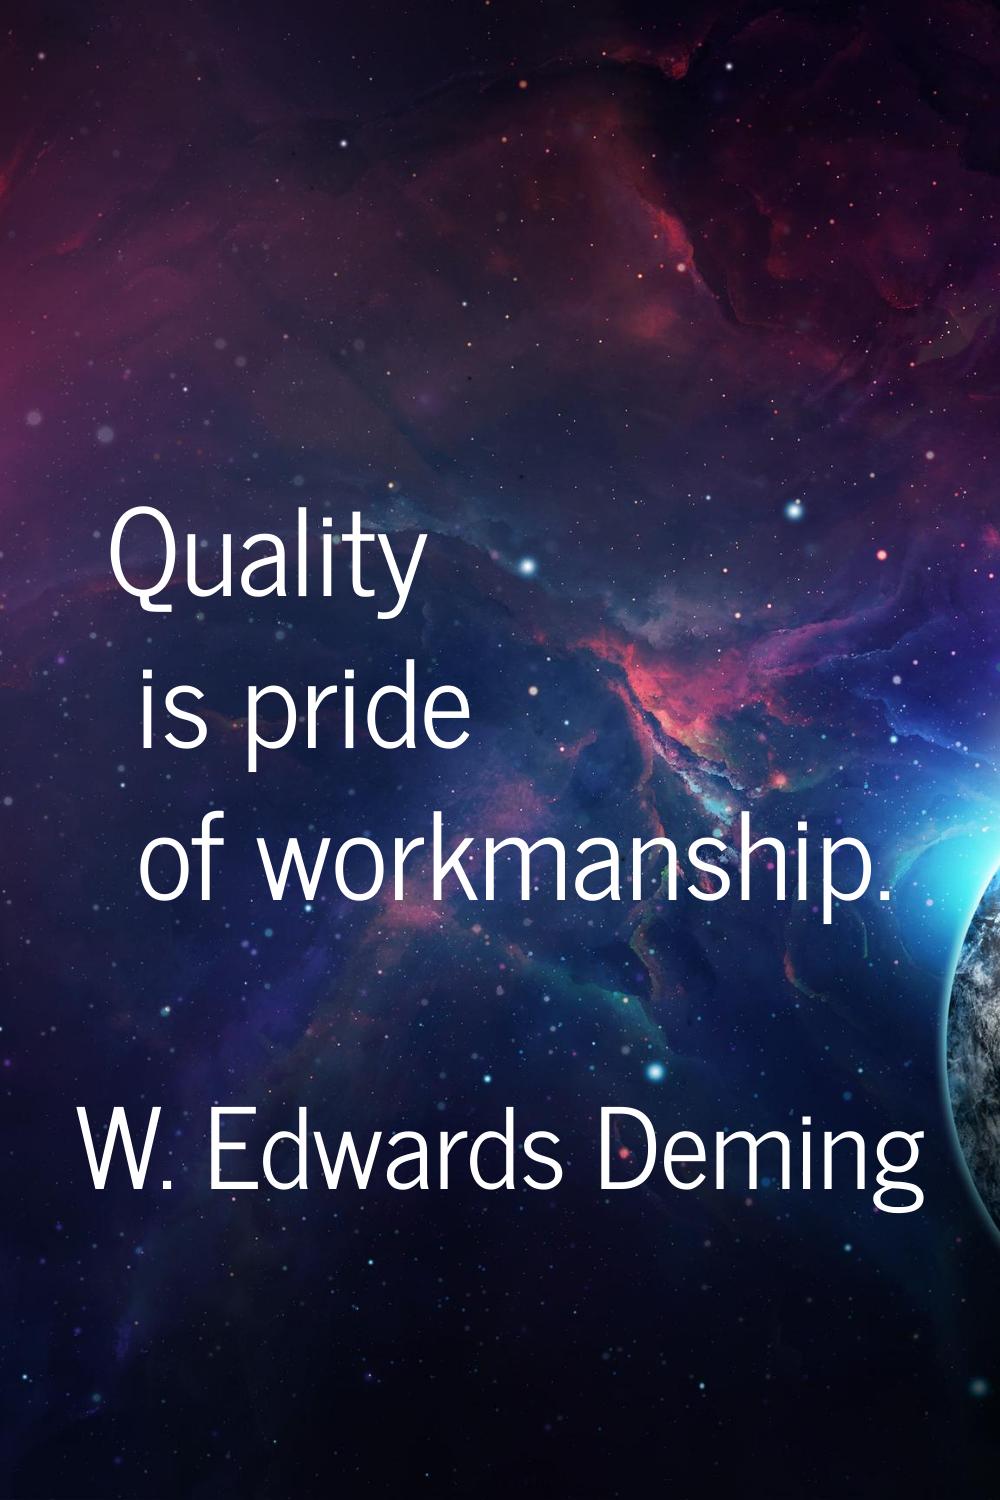 Quality is pride of workmanship.